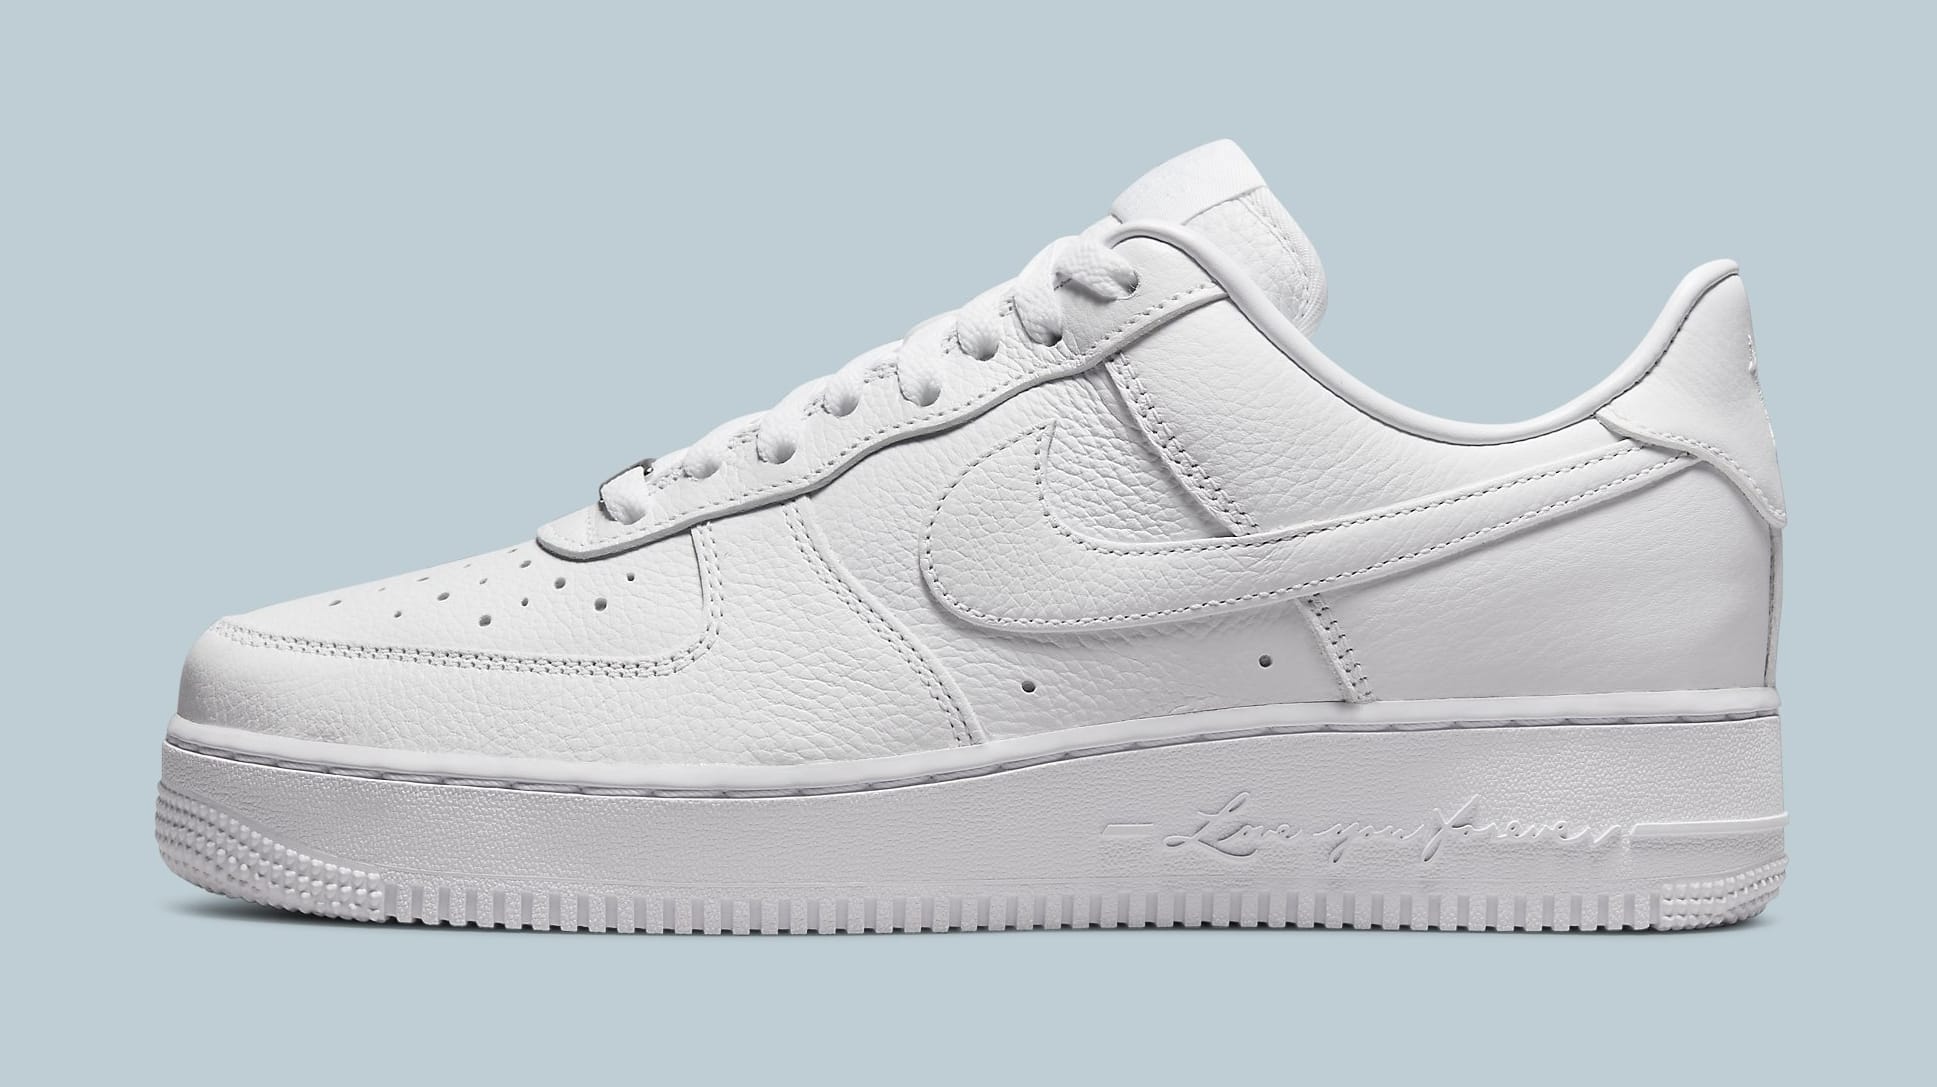 Drake Nocta x Nike Air Force 1 Low 'Certified Lover Boy' Release 